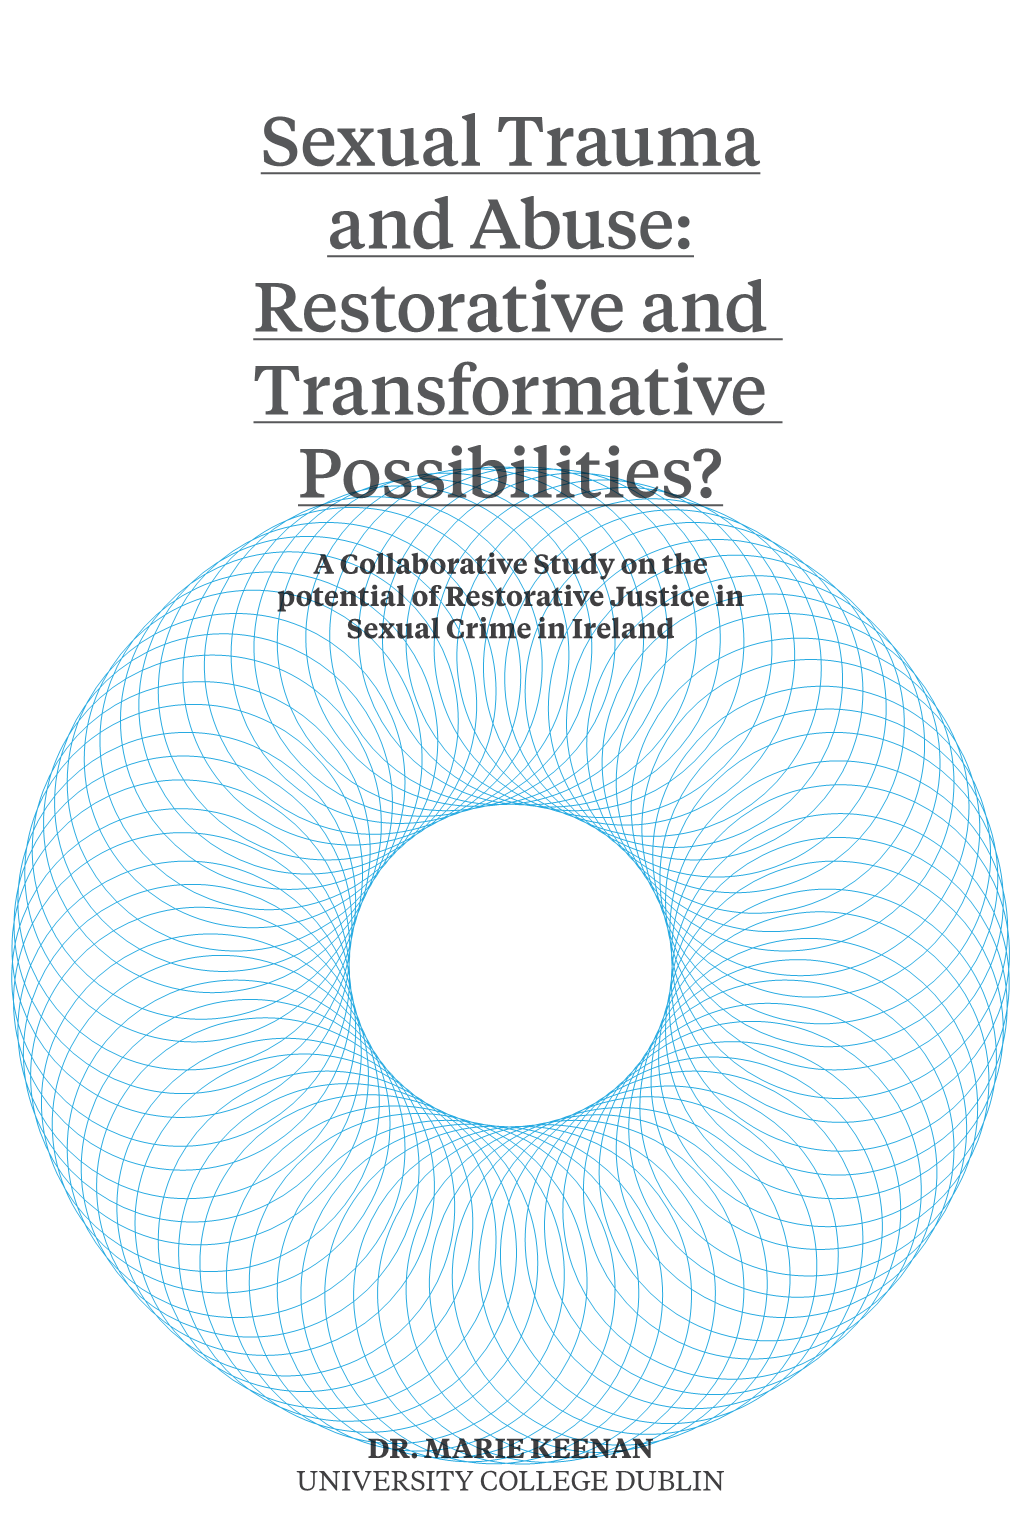 Sexual Trauma and Abuse: Restorative and Transformative Possibilities?